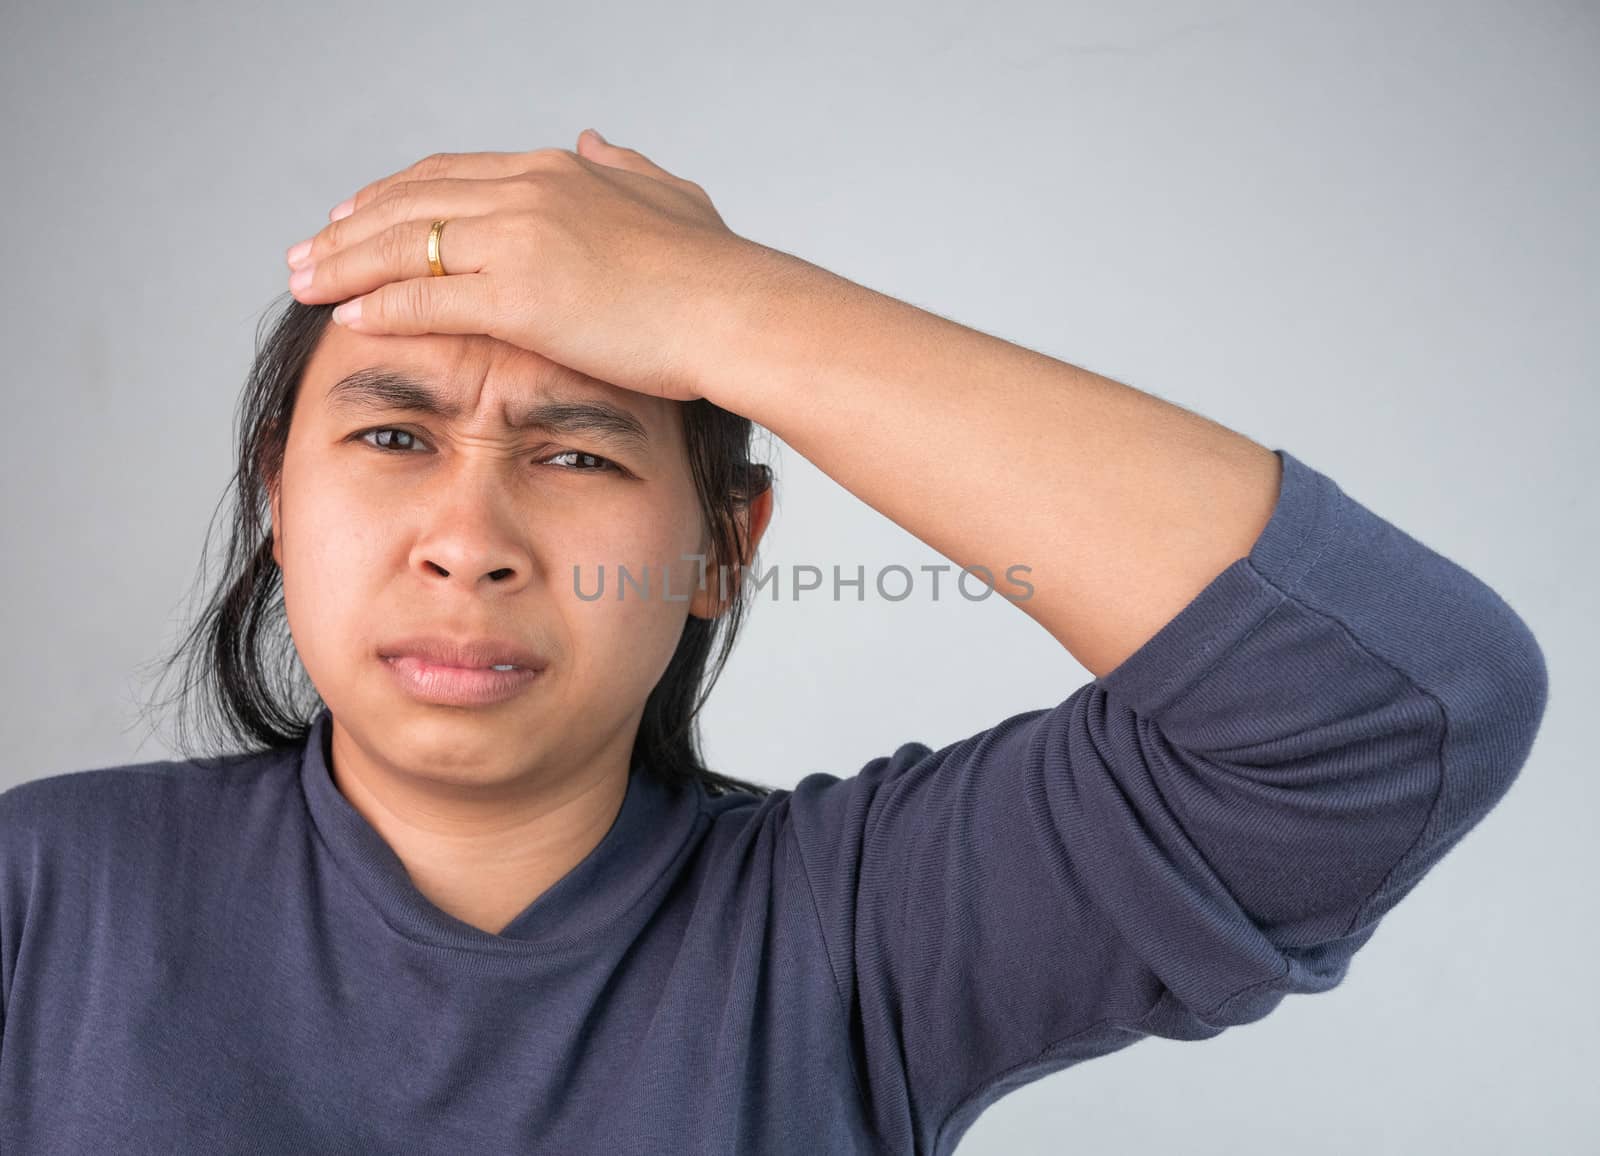 Woman catching on head because she have acute headache. Healthcare and medical concepts.